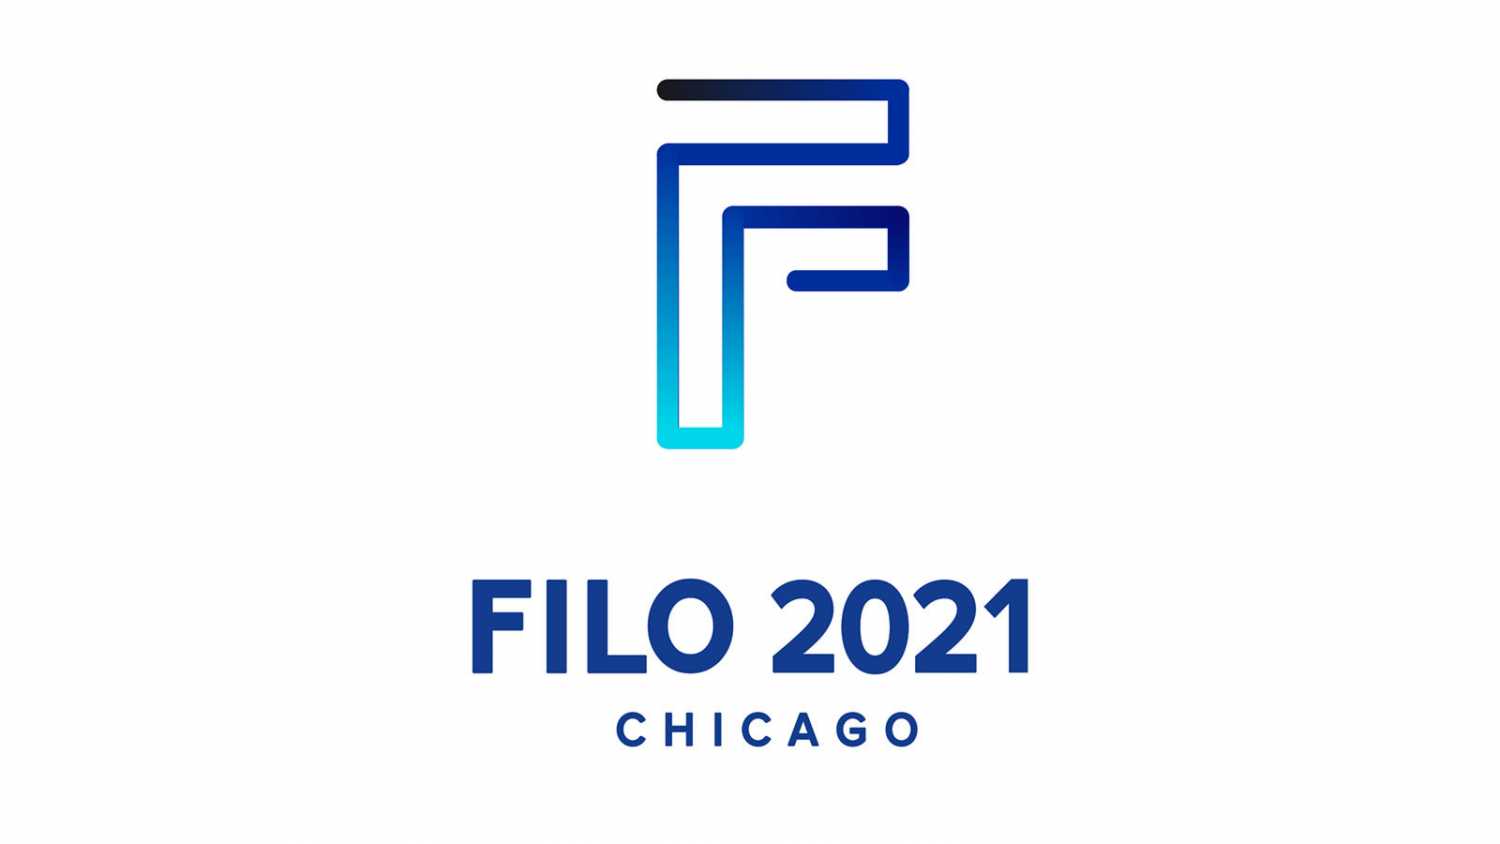 FILO (First In Last Out) was created for technical artists who serve the local church